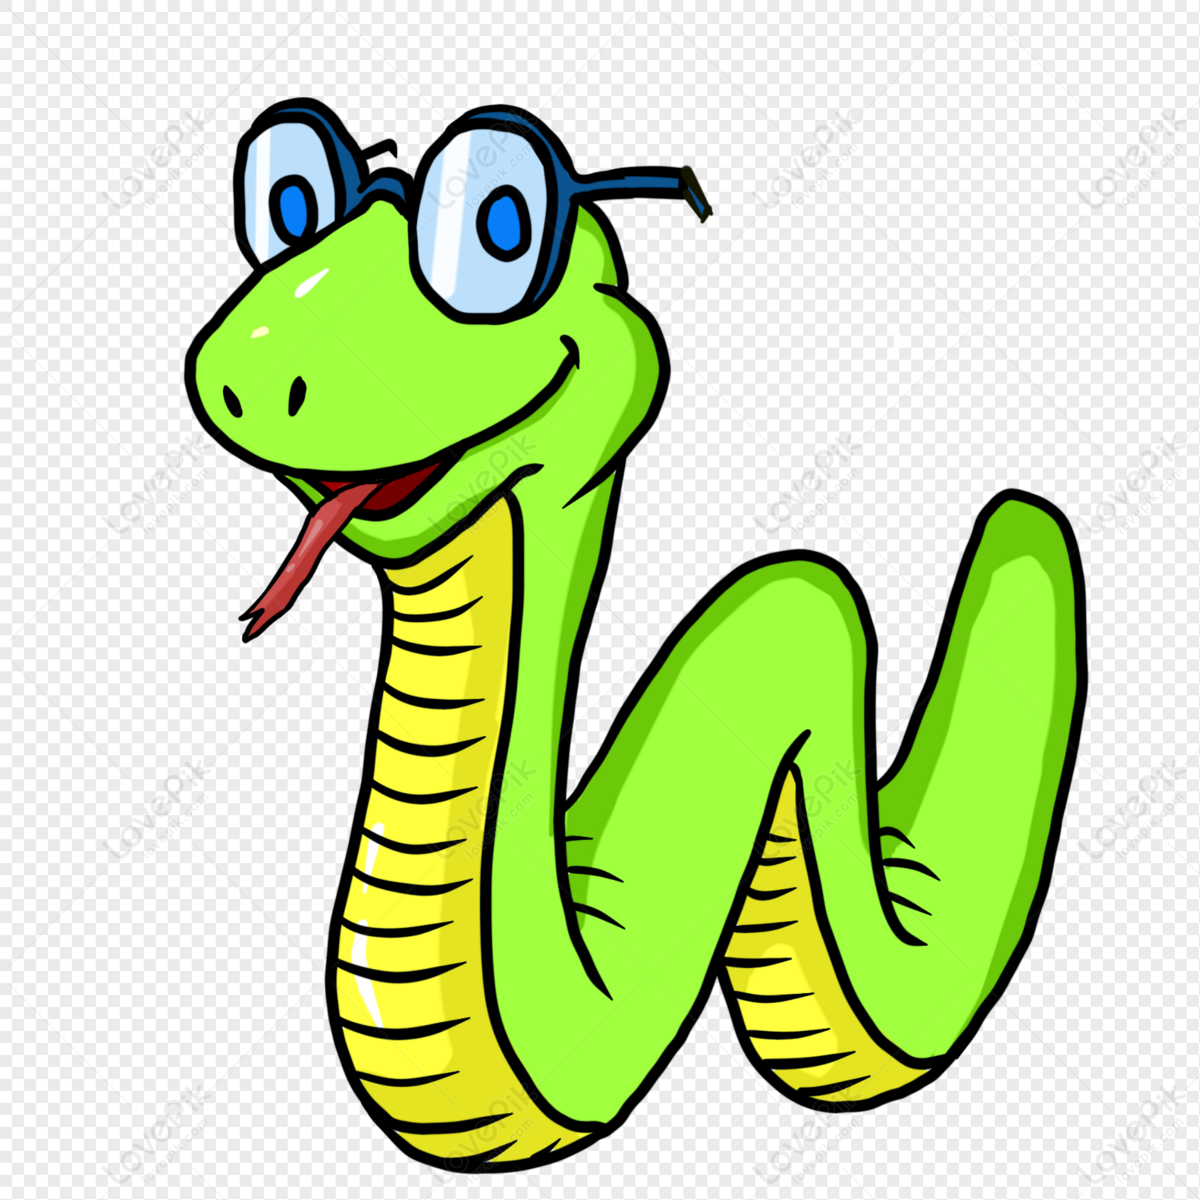 Snake Wearing Glasses PNG Transparent Image And Clipart Image For Free  Download - Lovepik | 401391097